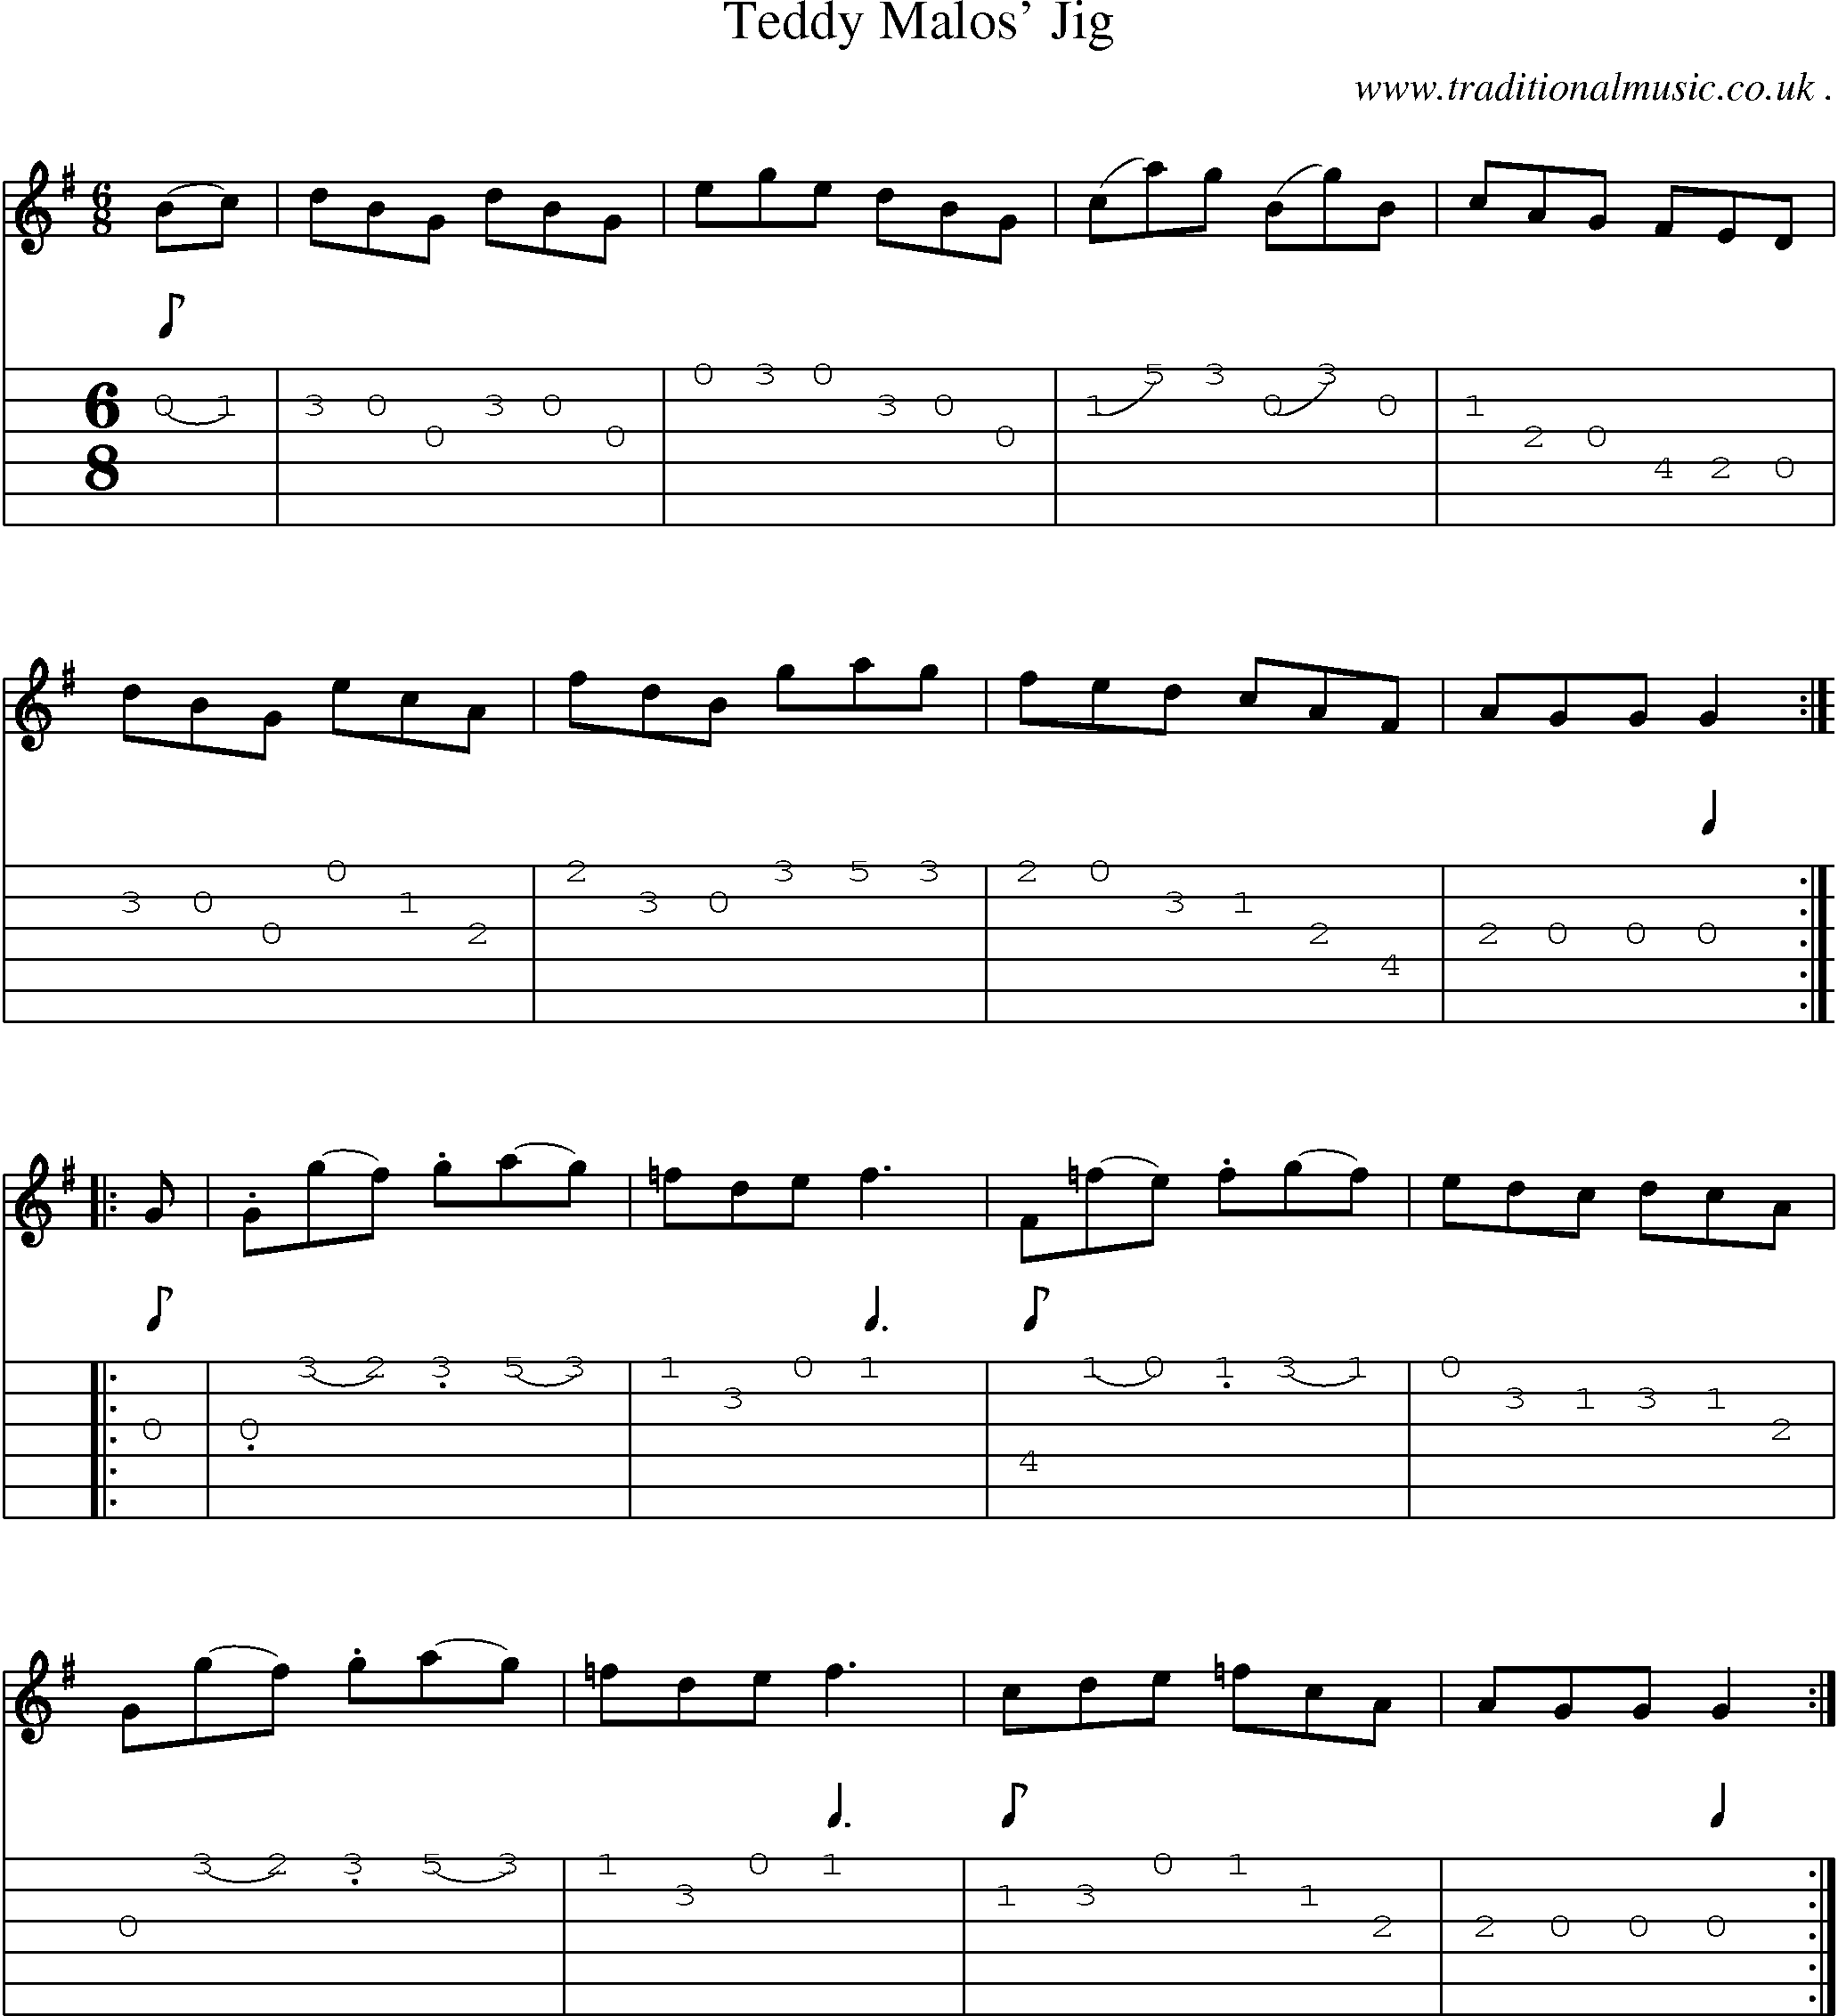 Sheet-Music and Guitar Tabs for Teddy Malos Jig